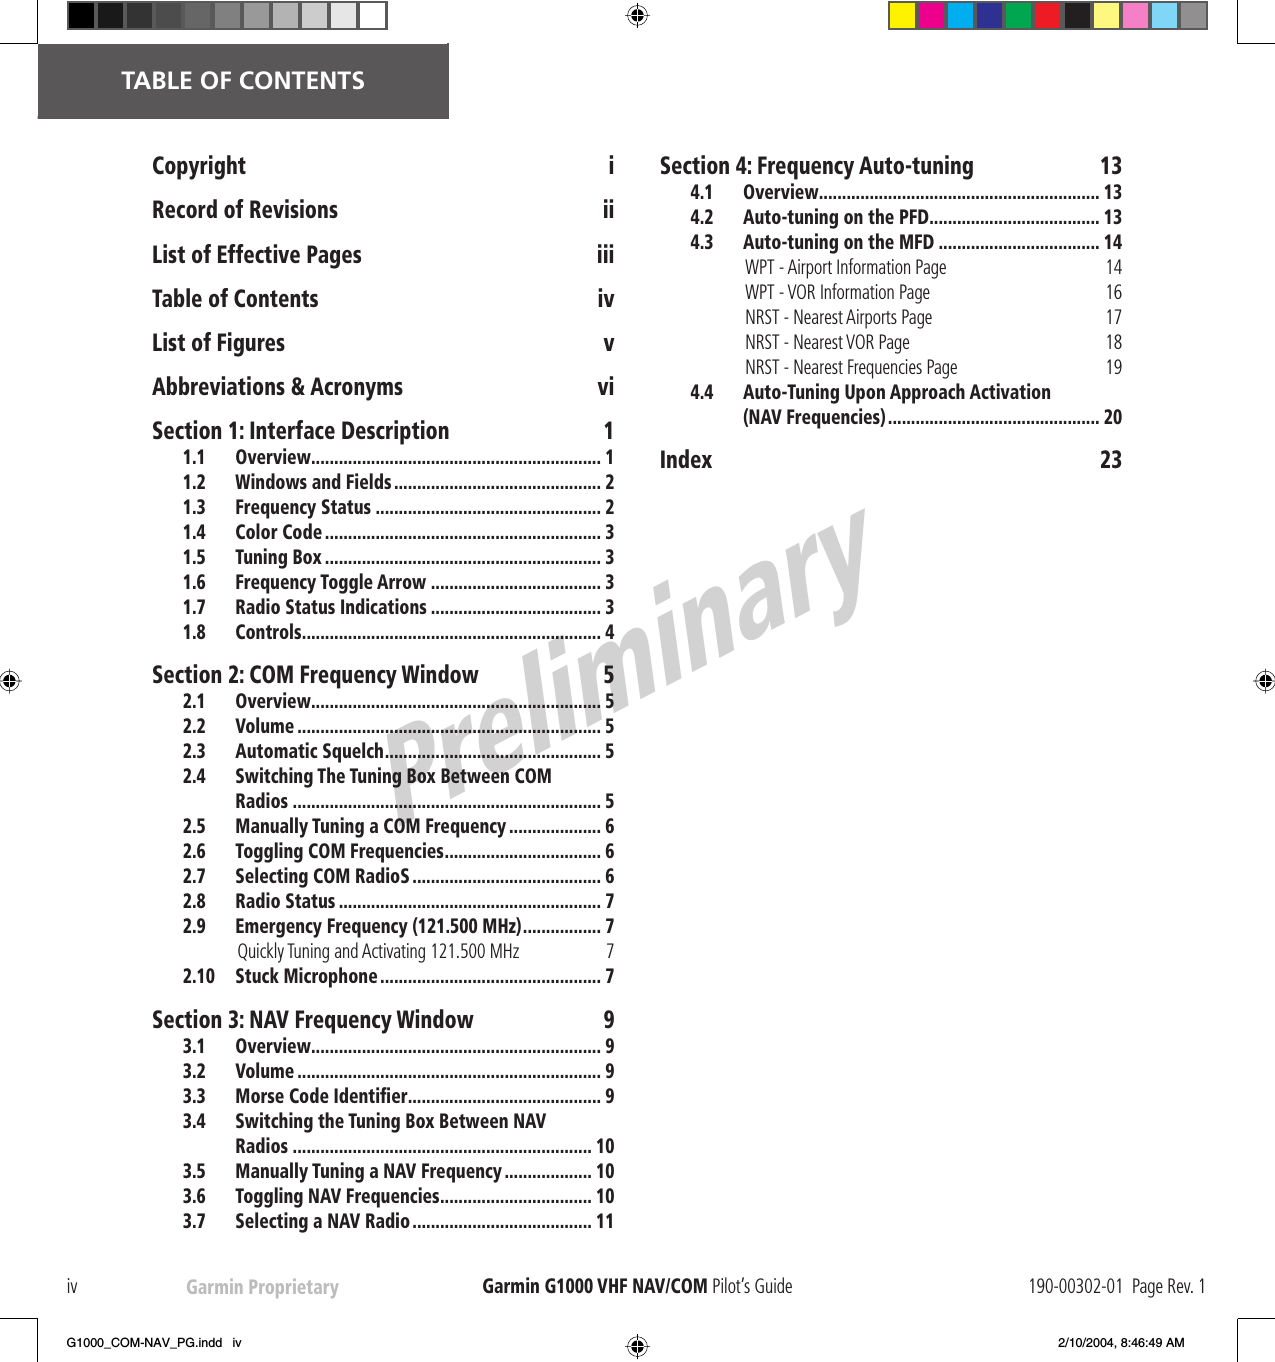 PreliminaryGarmin Proprietaryiv Garmin G1000  VHF NAV/COM Pilot’s Guide 190-00302-01  Page Rev. 1   TABLE OF CONTENTSCopyright iRecord of Revisions  iiList of Effective Pages  iiiTable of Contents  ivList of Figures  vAbbreviations &amp; Acronyms  viSection 1: Interface Description  11.1 Overview............................................................... 11.2  Windows and Fields ............................................. 21.3 Frequency Status ................................................. 21.4 Color Code ............................................................ 31.5 Tuning Box ............................................................ 31.6 Frequency Toggle Arrow ..................................... 31.7 Radio Status Indications ..................................... 31.8 Controls................................................................. 4Section 2: COM Frequency Window  52.1 Overview............................................................... 52.2 Volume .................................................................. 52.3 Automatic Squelch............................................... 52.4  Switching The Tuning Box Between COM Radios ................................................................... 52.5  Manually Tuning a COM Frequency .................... 62.6  Toggling COM Frequencies.................................. 62.7 Selecting COM RadioS ......................................... 62.8 Radio Status ......................................................... 72.9  Emergency Frequency (121.500 MHz)................. 7Quickly Tuning and Activating 121.500 MHz  72.10 Stuck Microphone................................................ 7Section 3: NAV Frequency Window  93.1 Overview............................................................... 93.2 Volume .................................................................. 93.3 Morse Code Identiﬁ er.......................................... 93.4  Switching the Tuning Box Between NAV Radios ................................................................. 103.5  Manually Tuning a NAV Frequency................... 103.6  Toggling NAV Frequencies................................. 103.7  Selecting a NAV Radio ....................................... 11Section 4: Frequency Auto-tuning  134.1 Overview............................................................. 134.2  Auto-tuning on the PFD..................................... 134.3  Auto-tuning on the MFD ................................... 14WPT - Airport Information Page  14WPT - VOR Information Page  16NRST - Nearest Airports Page  17NRST - Nearest VOR Page  18NRST - Nearest Frequencies Page  194.4  Auto-Tuning Upon Approach Activation (NAV Frequencies).............................................. 20Index 23G1000_COM-NAV_PG.indd   iv 2/10/2004, 8:46:49 AM